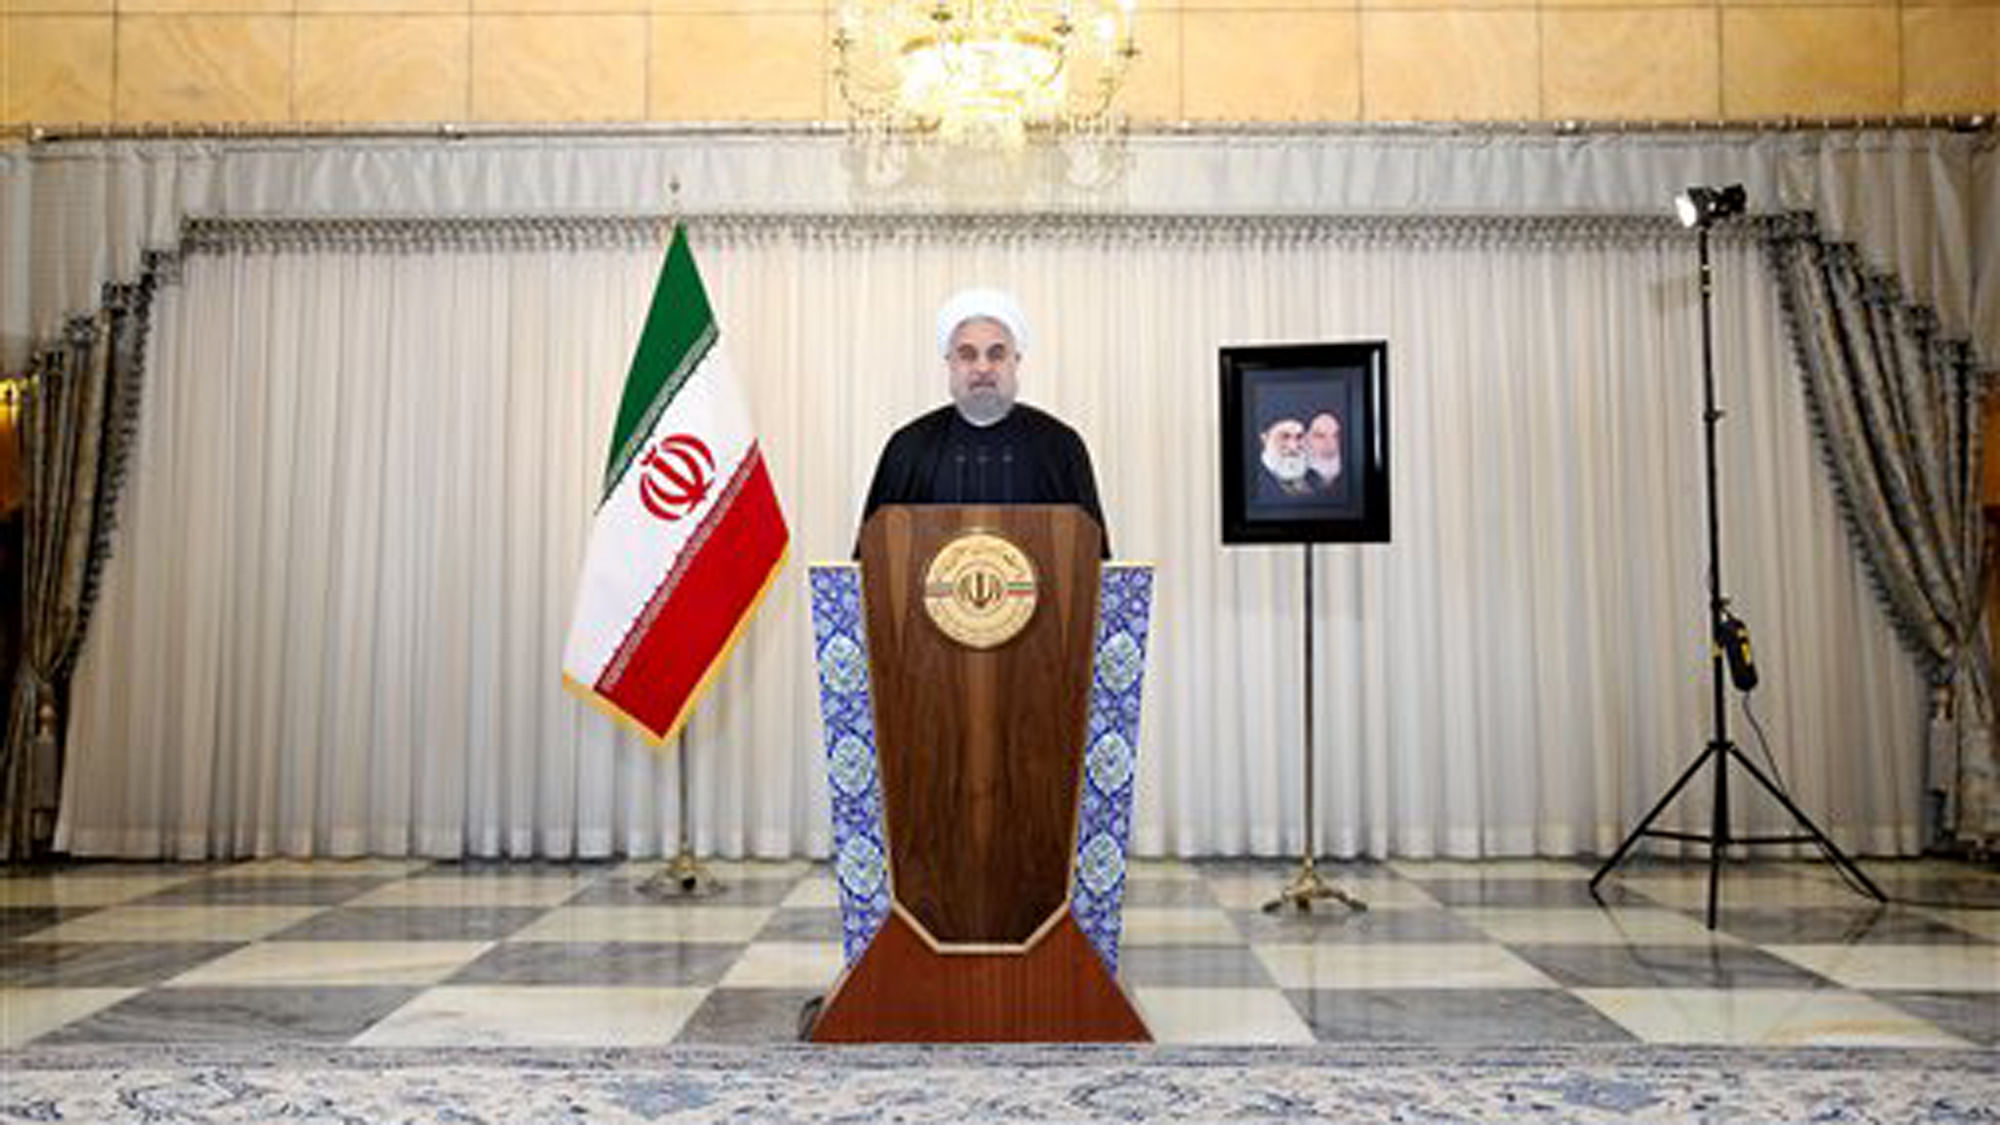 Iran’s President Hassan Rouhani addresses the nation in a televised speech after the closure of Iran’s nuclear probe at the IAEA meeting, at his office in Tehran, Iran, Wednesday, Dec. 16, 2015. (Photo: AP) 